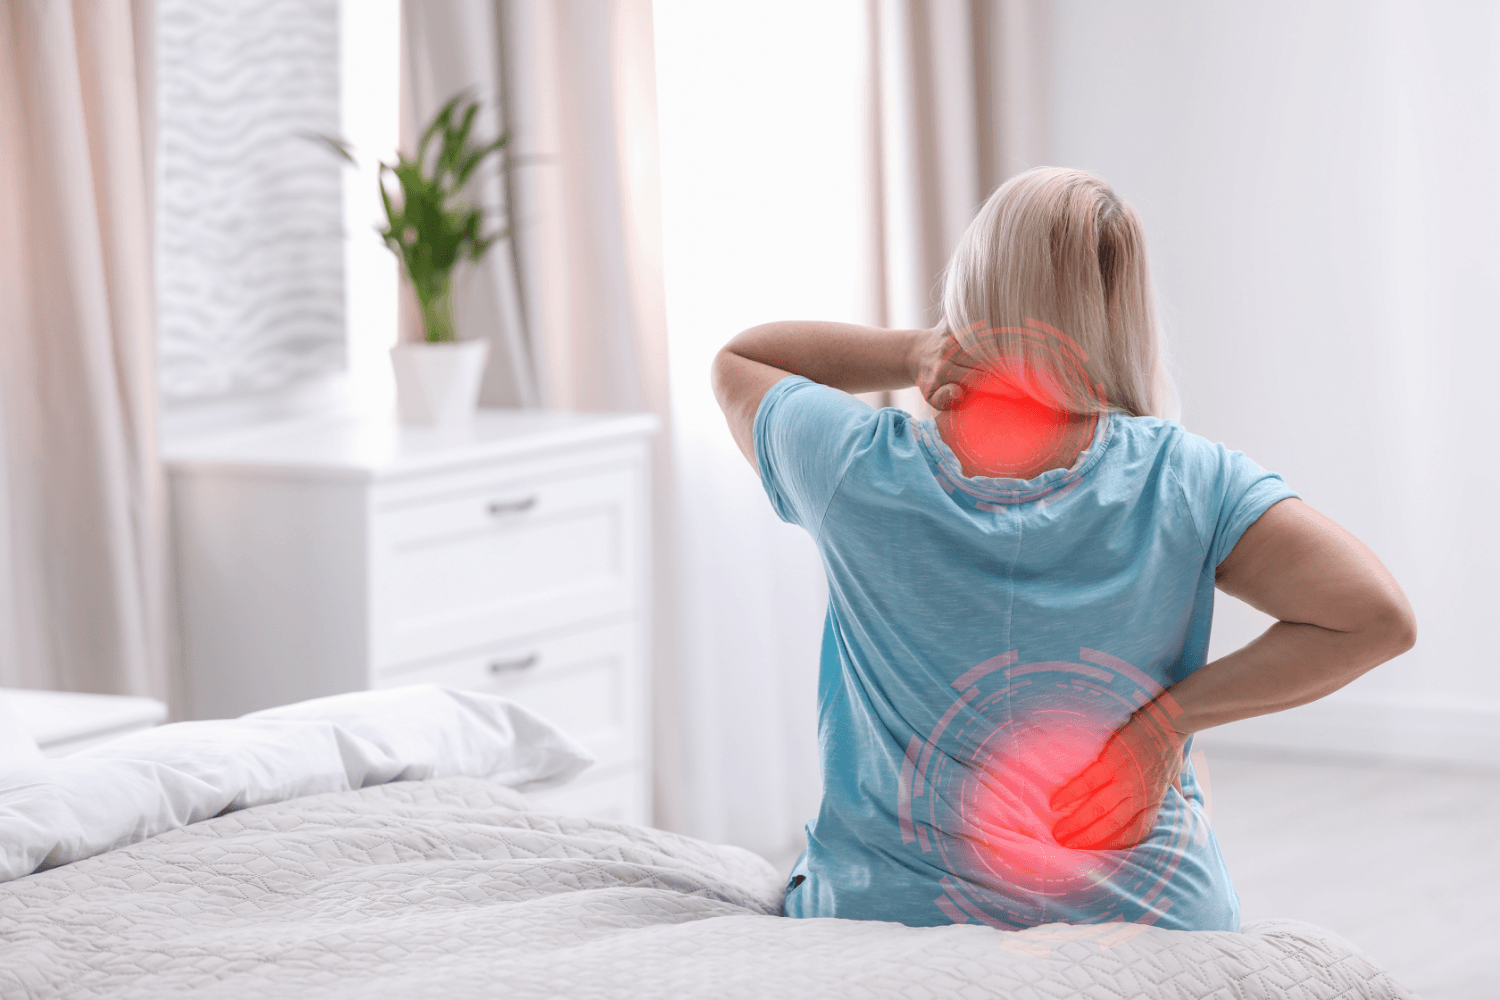 Image showing woman with back pains